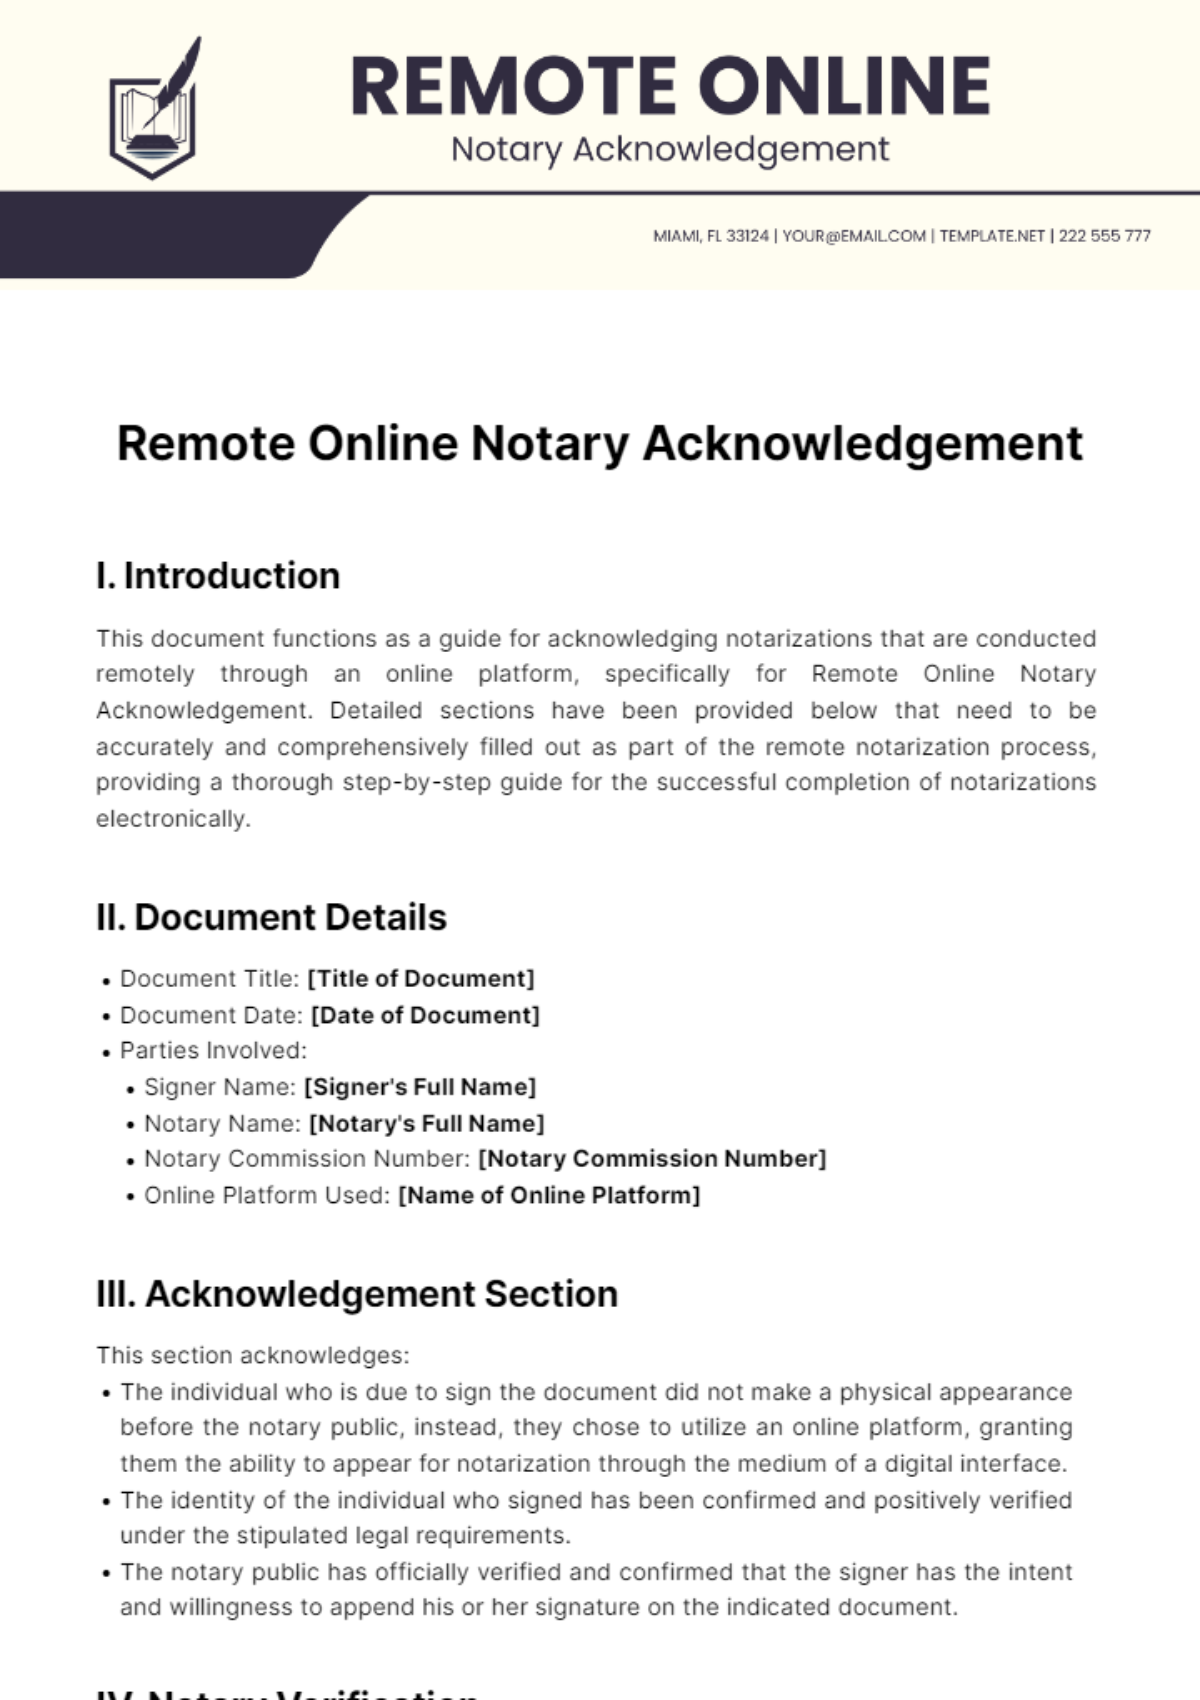 Remote Online Notary Acknowledgement Template